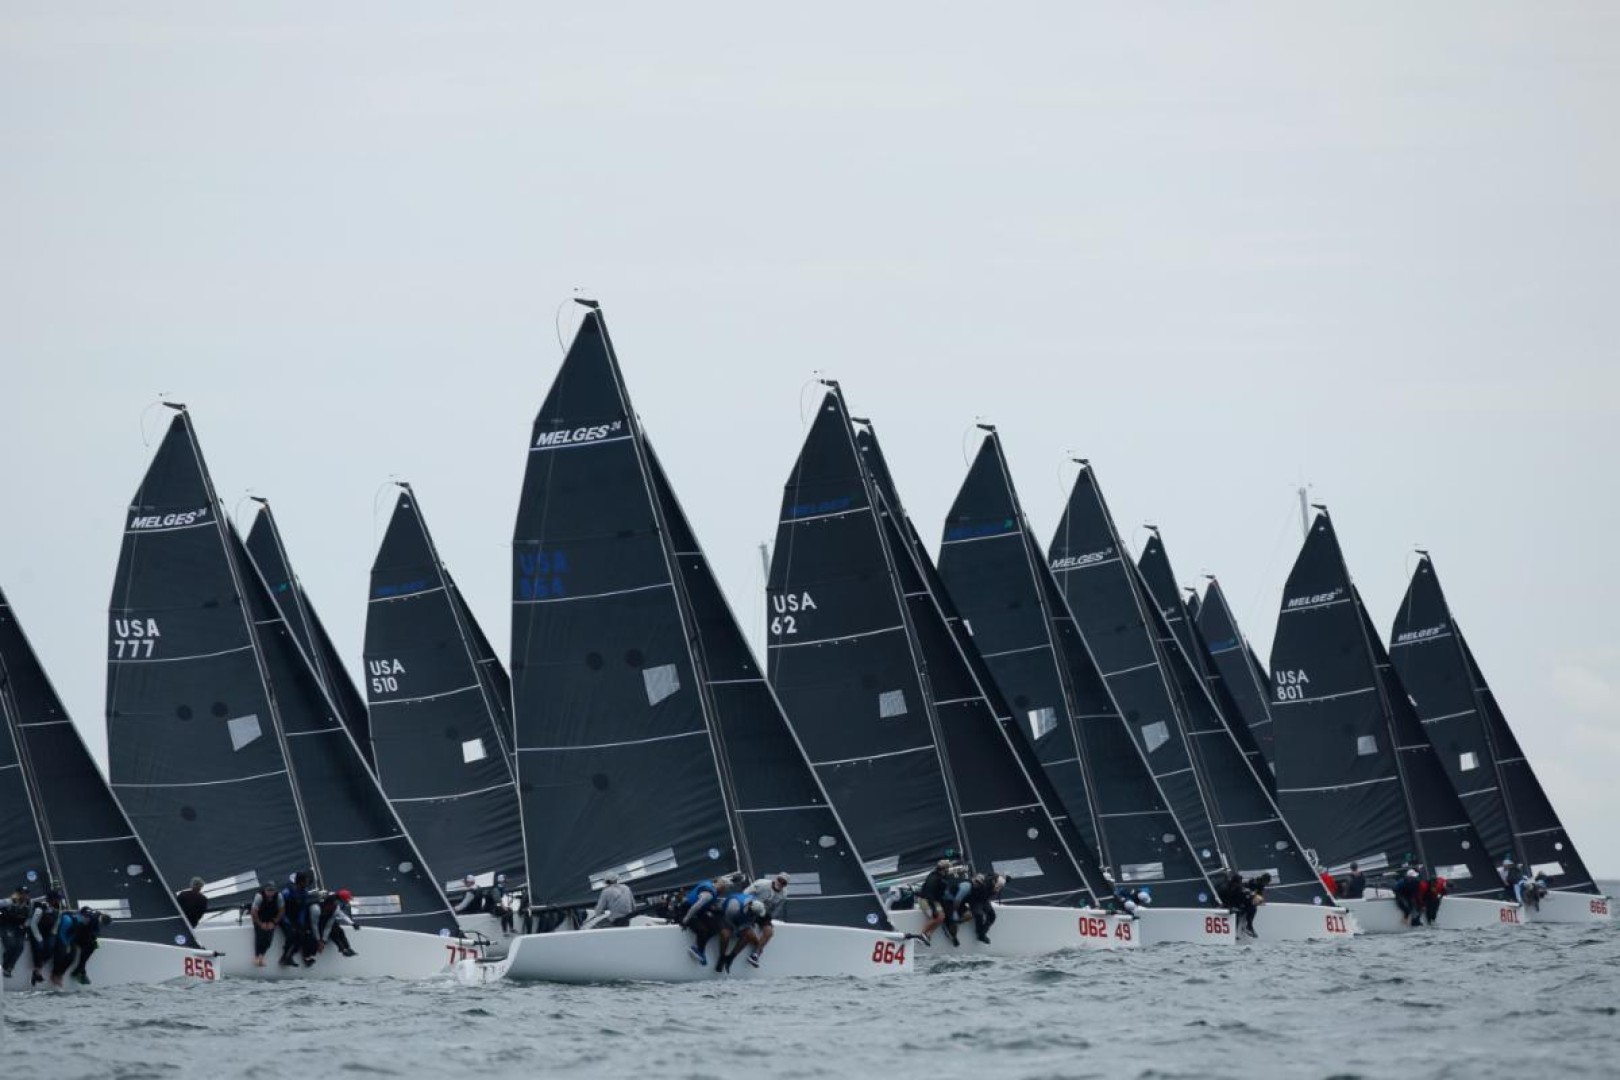 The 2022 U.S. National Championship conducted its second day of racing on Pensacola Bay, Florida with overcast skies, shifty breezes and cooler temperatures.